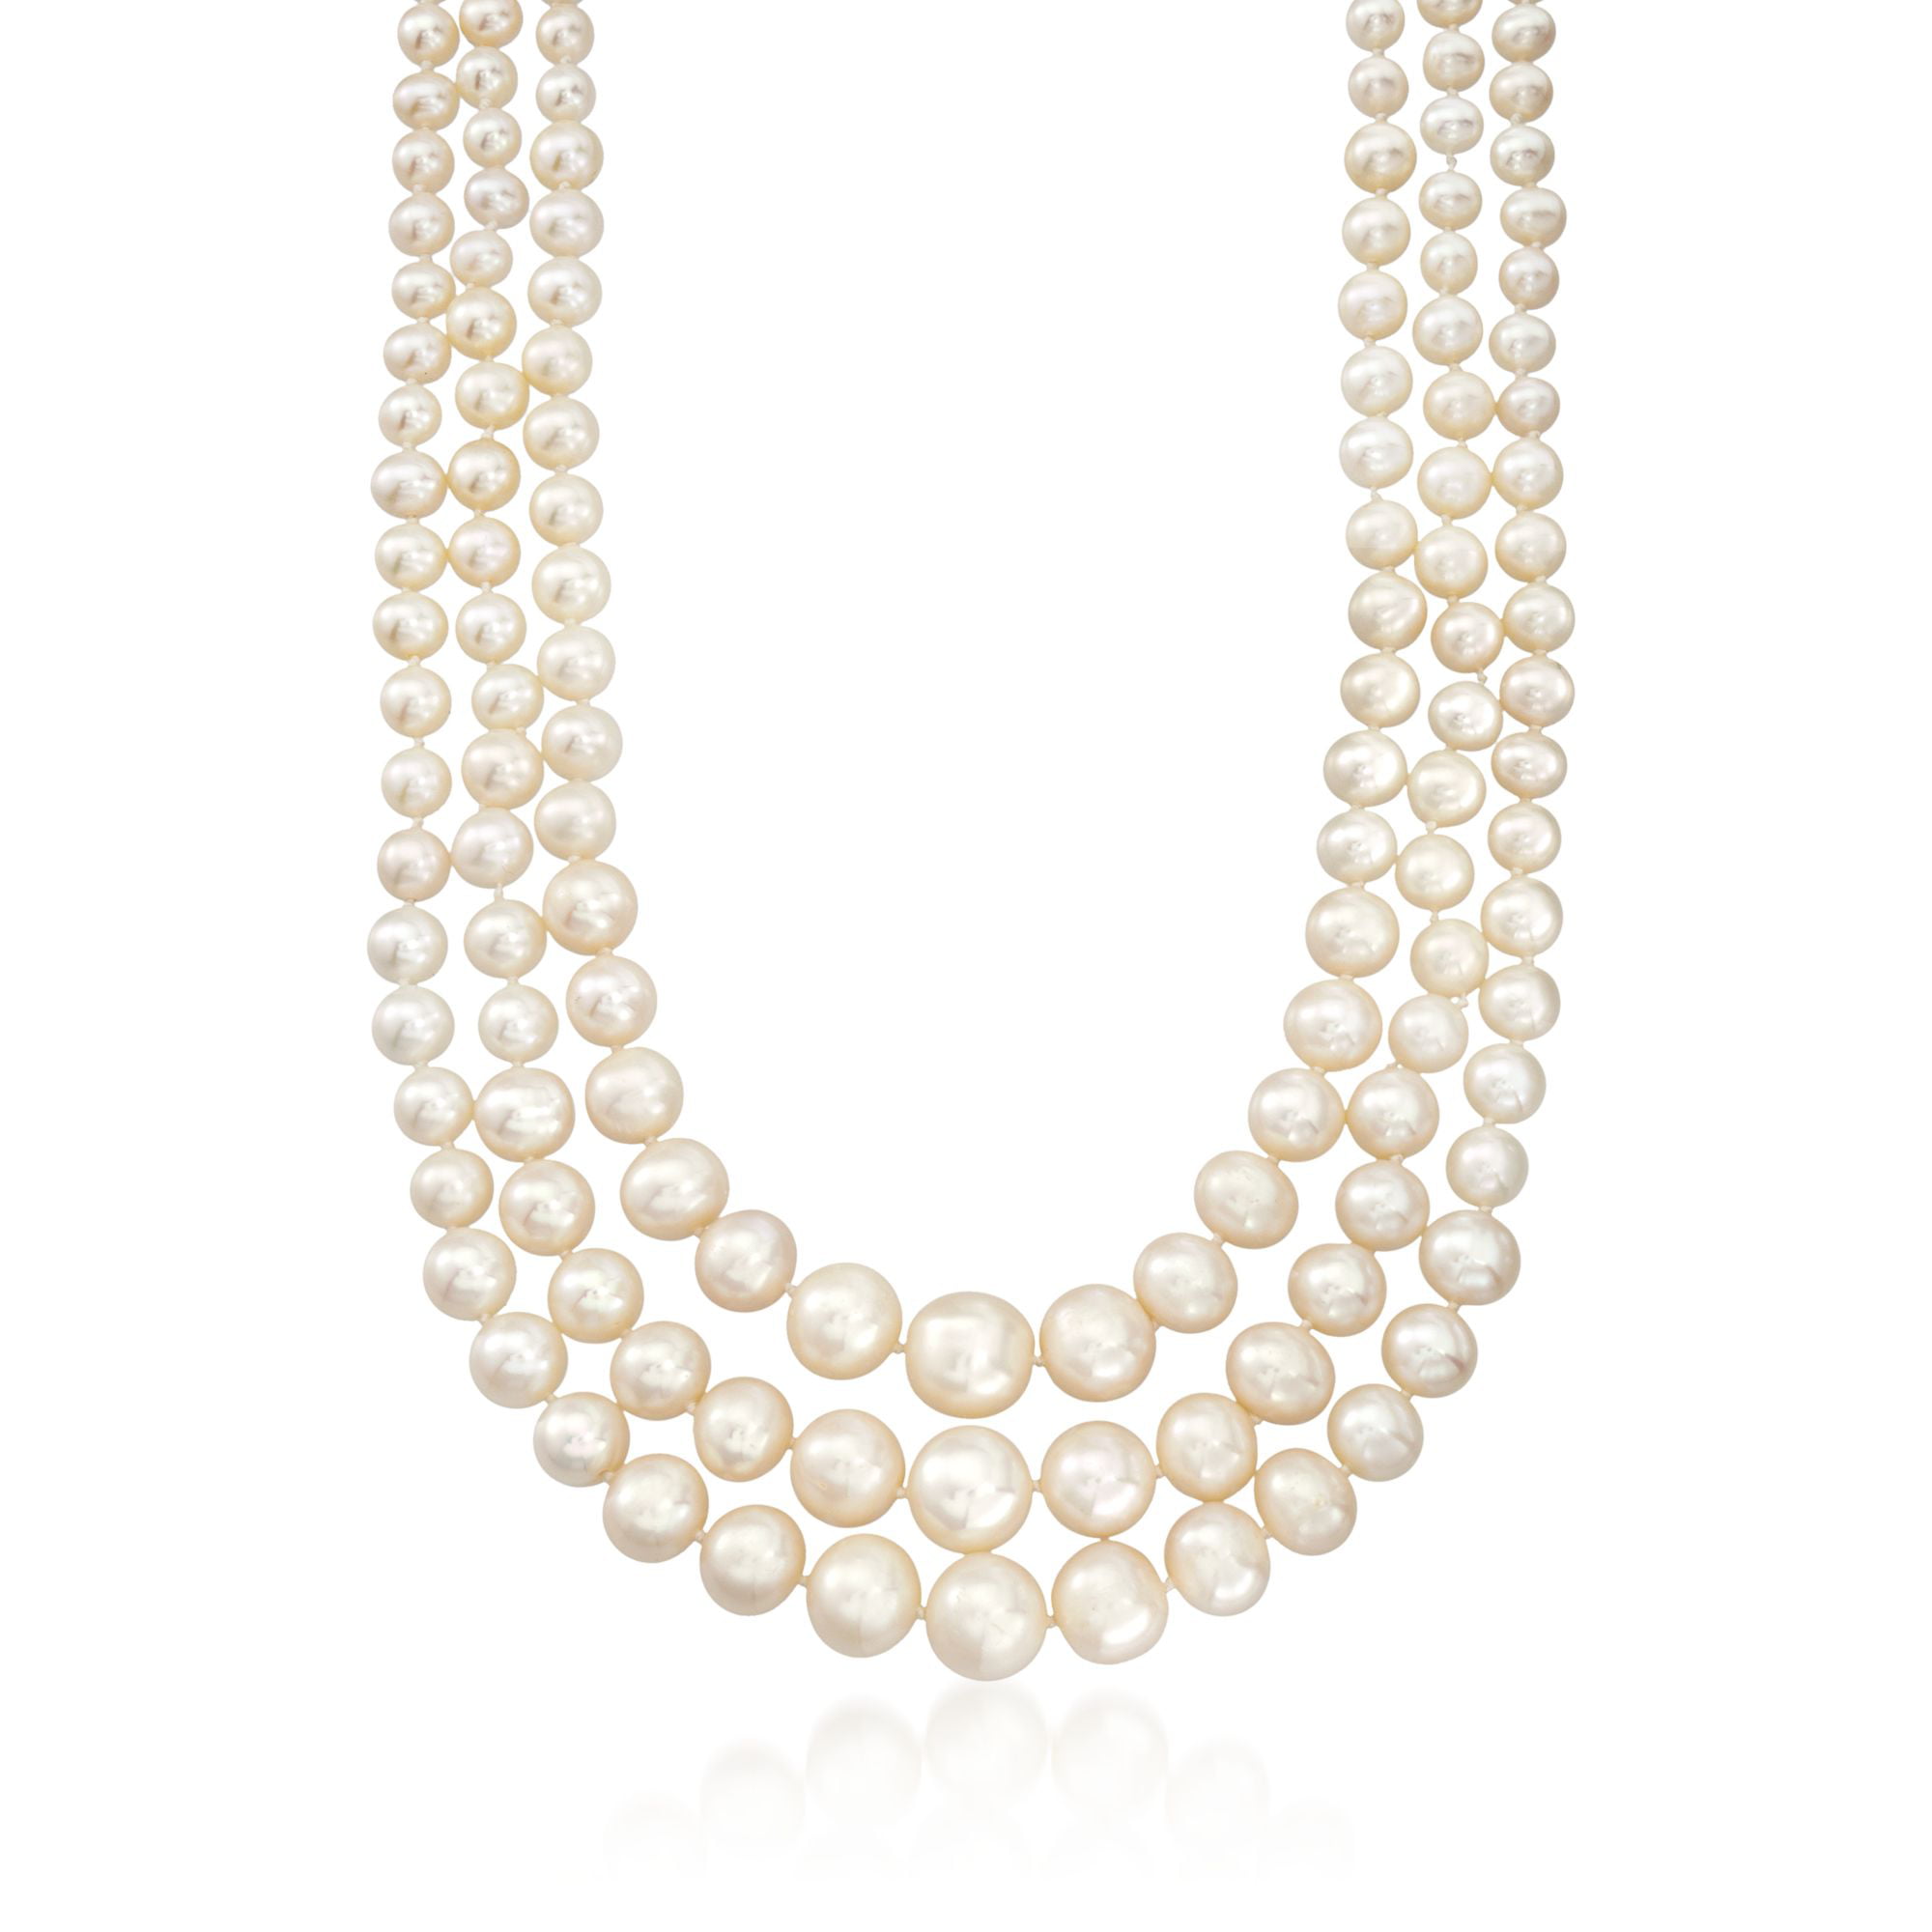 Ross-Simons 6-12.5mm Cultured Pearl 3-Strand Necklace With 14kt Yellow